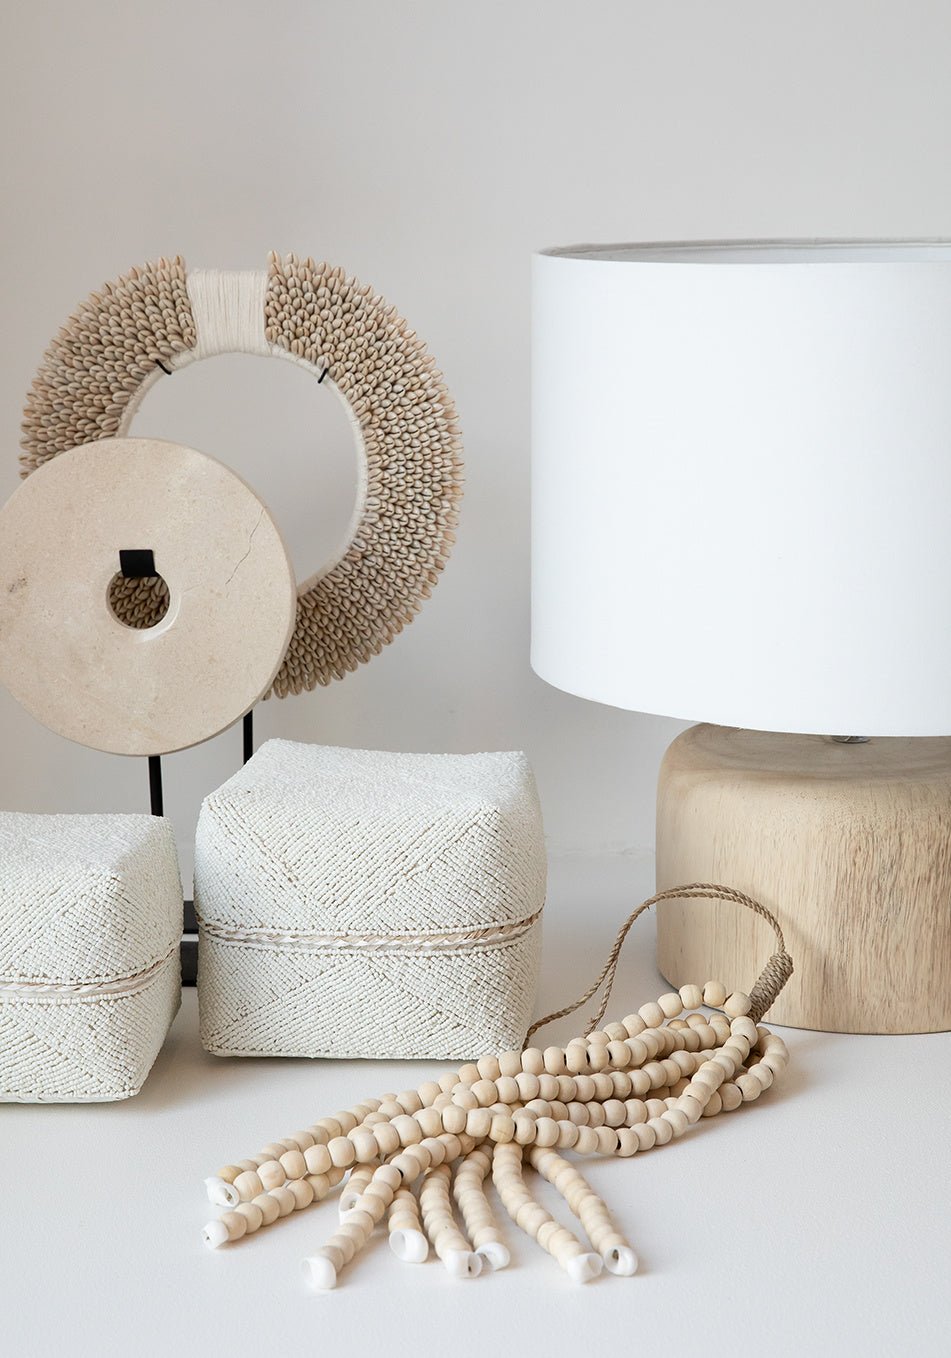 The table lamp in teak wood - Natural white